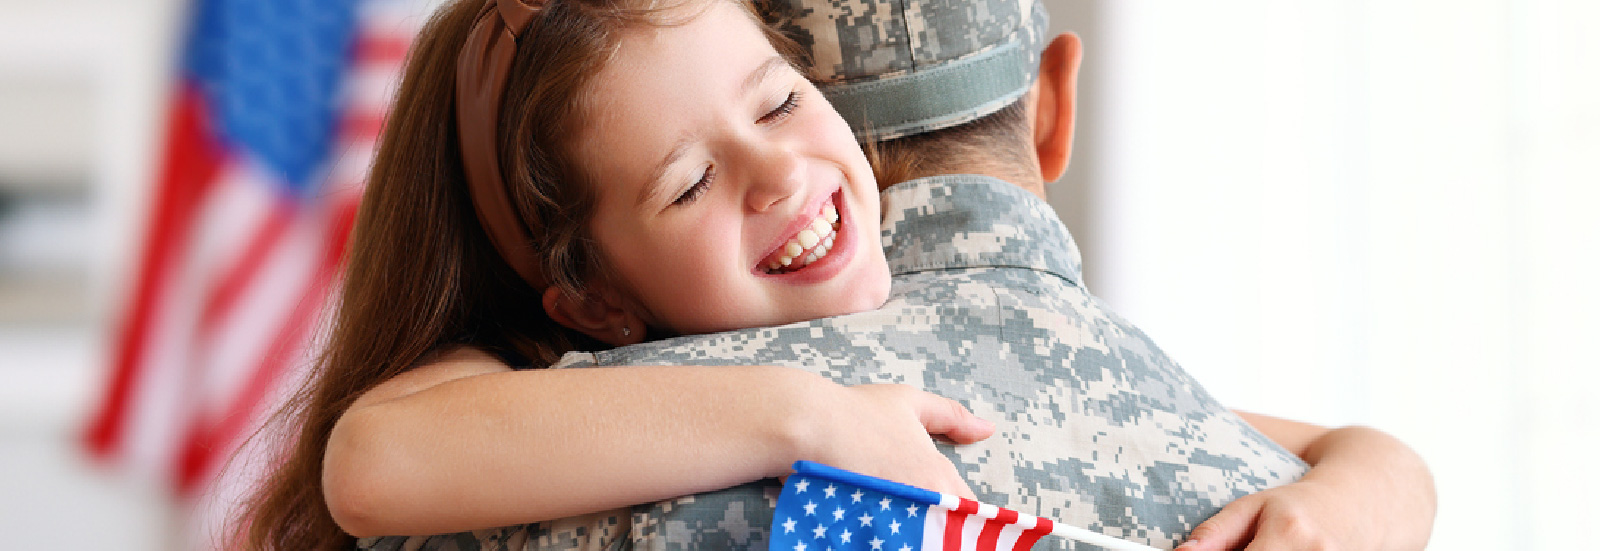 How To Transfer GI Bill to Dependents